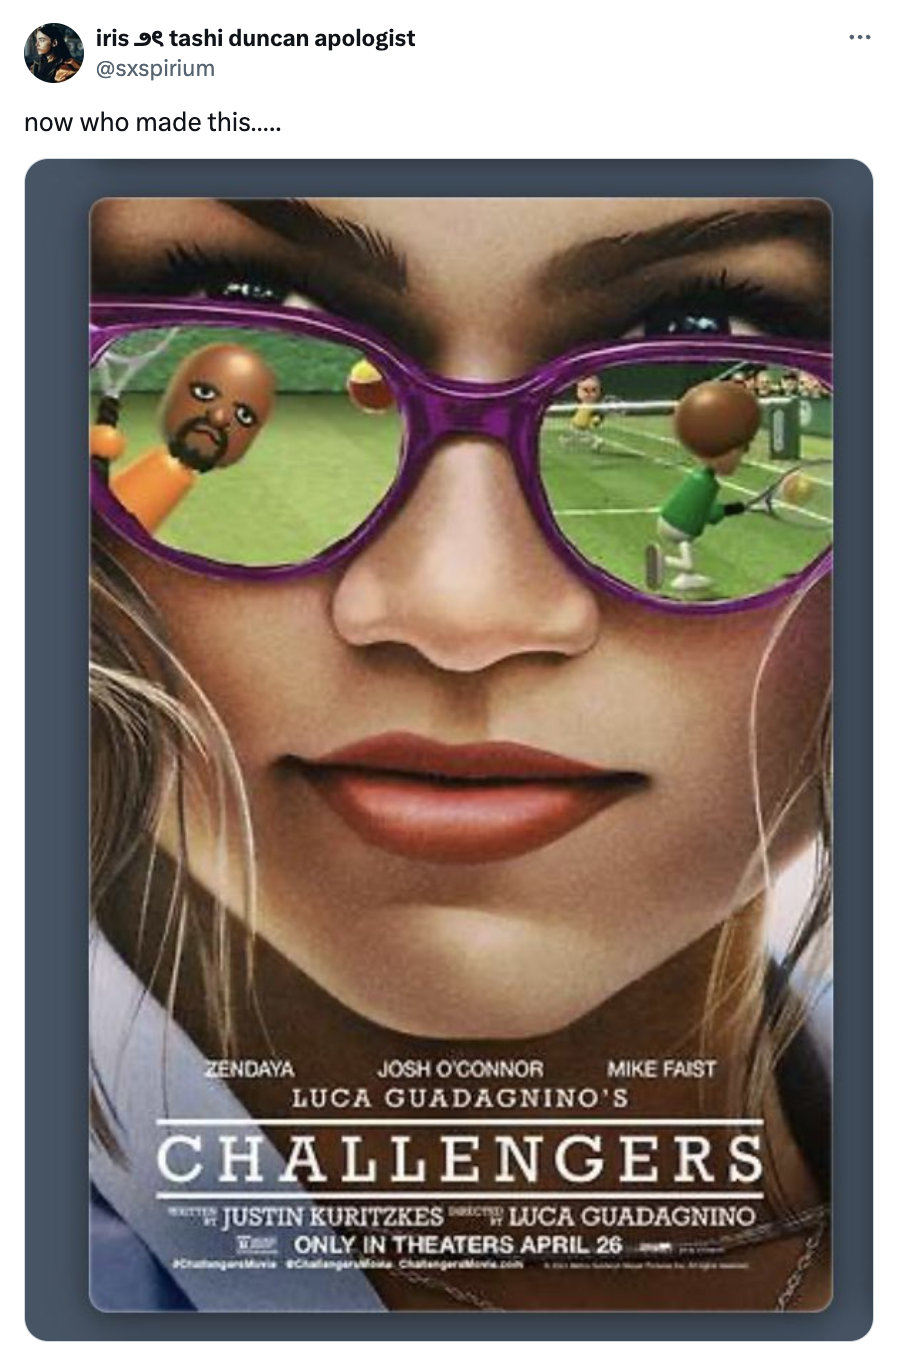 Movie poster for &quot;Challengers&quot; featuring close-up of Zendaya in sunglasses reflecting a tennis court. Text: actors&#x27; names, title, release date